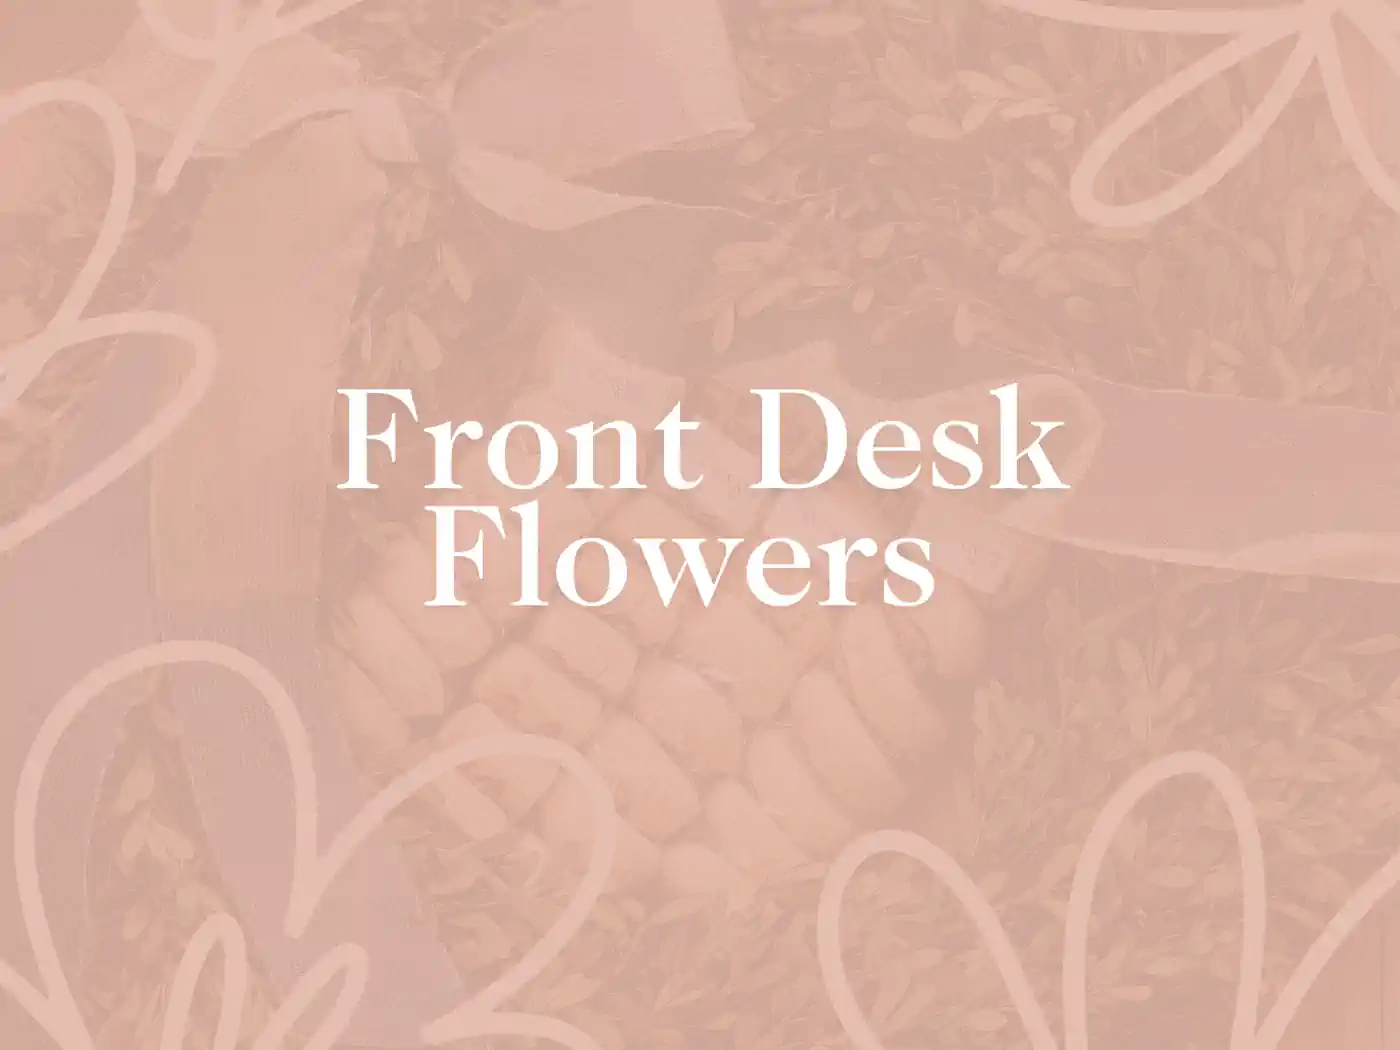 Elegant promotional image for Front Desk Flowers, featuring a soft pink floral and ribbon background with bold white text. Fabulous Flowers and Gifts.